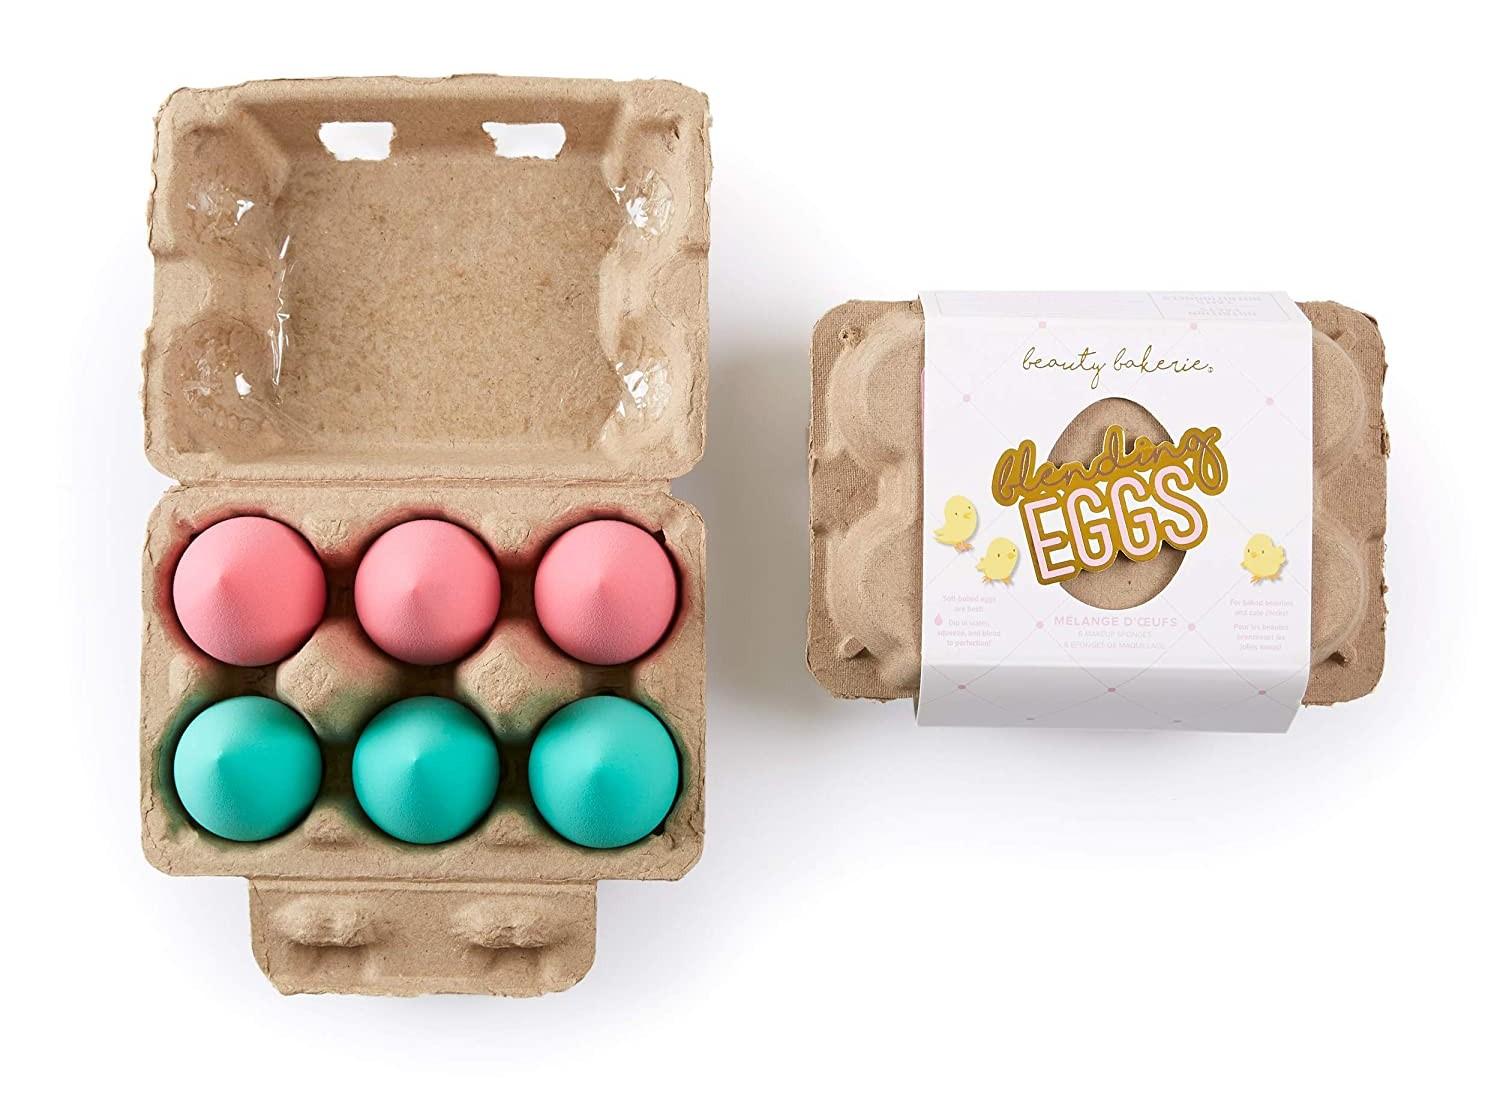 One open and one closed Beauty Bakerie egg sponges container.